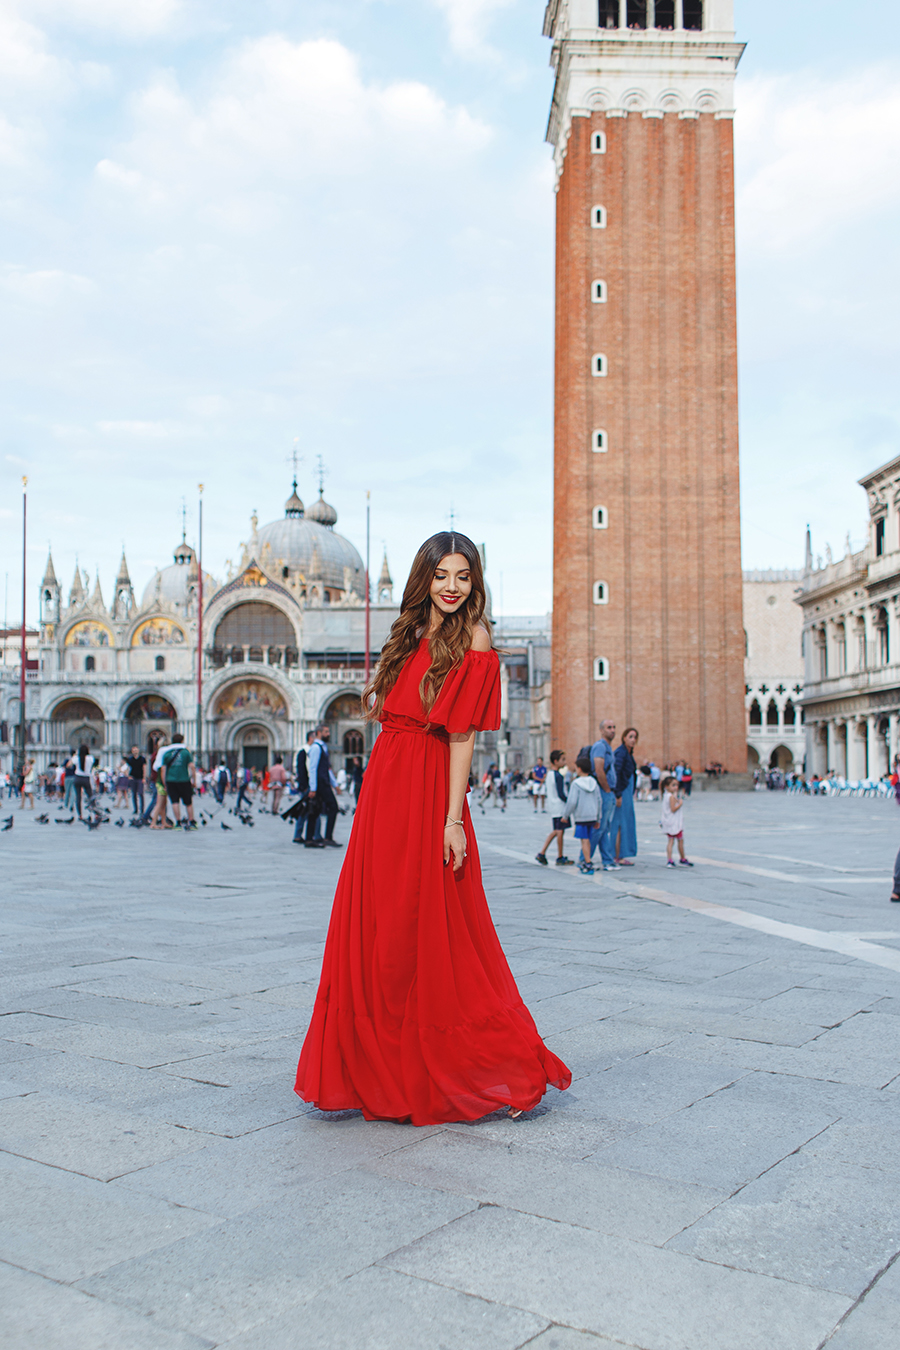 larisa costea, larisa costea blog, the mysterious girl, the mysterious girl blog, fashion blog, blogger, fashion, fashionista, it girl, travel blog, travel, traveler, ootd, lotd, outfit inspiration,look of the day,outfit of the day,what to wear,venice, venezia, san marco,piazza san marco,san marco square,fashion blogger in venice, travelbloggerin venice,larisainvenice, larisainvenezia,larisainitaly,red dress,long red dress, gown,chic diva,chic diva dress,rochie lunga, rochie ocazie, redl lips,red lipstick,bellami hair extension,bellami bella, pigeons, briges, ponte, gondola